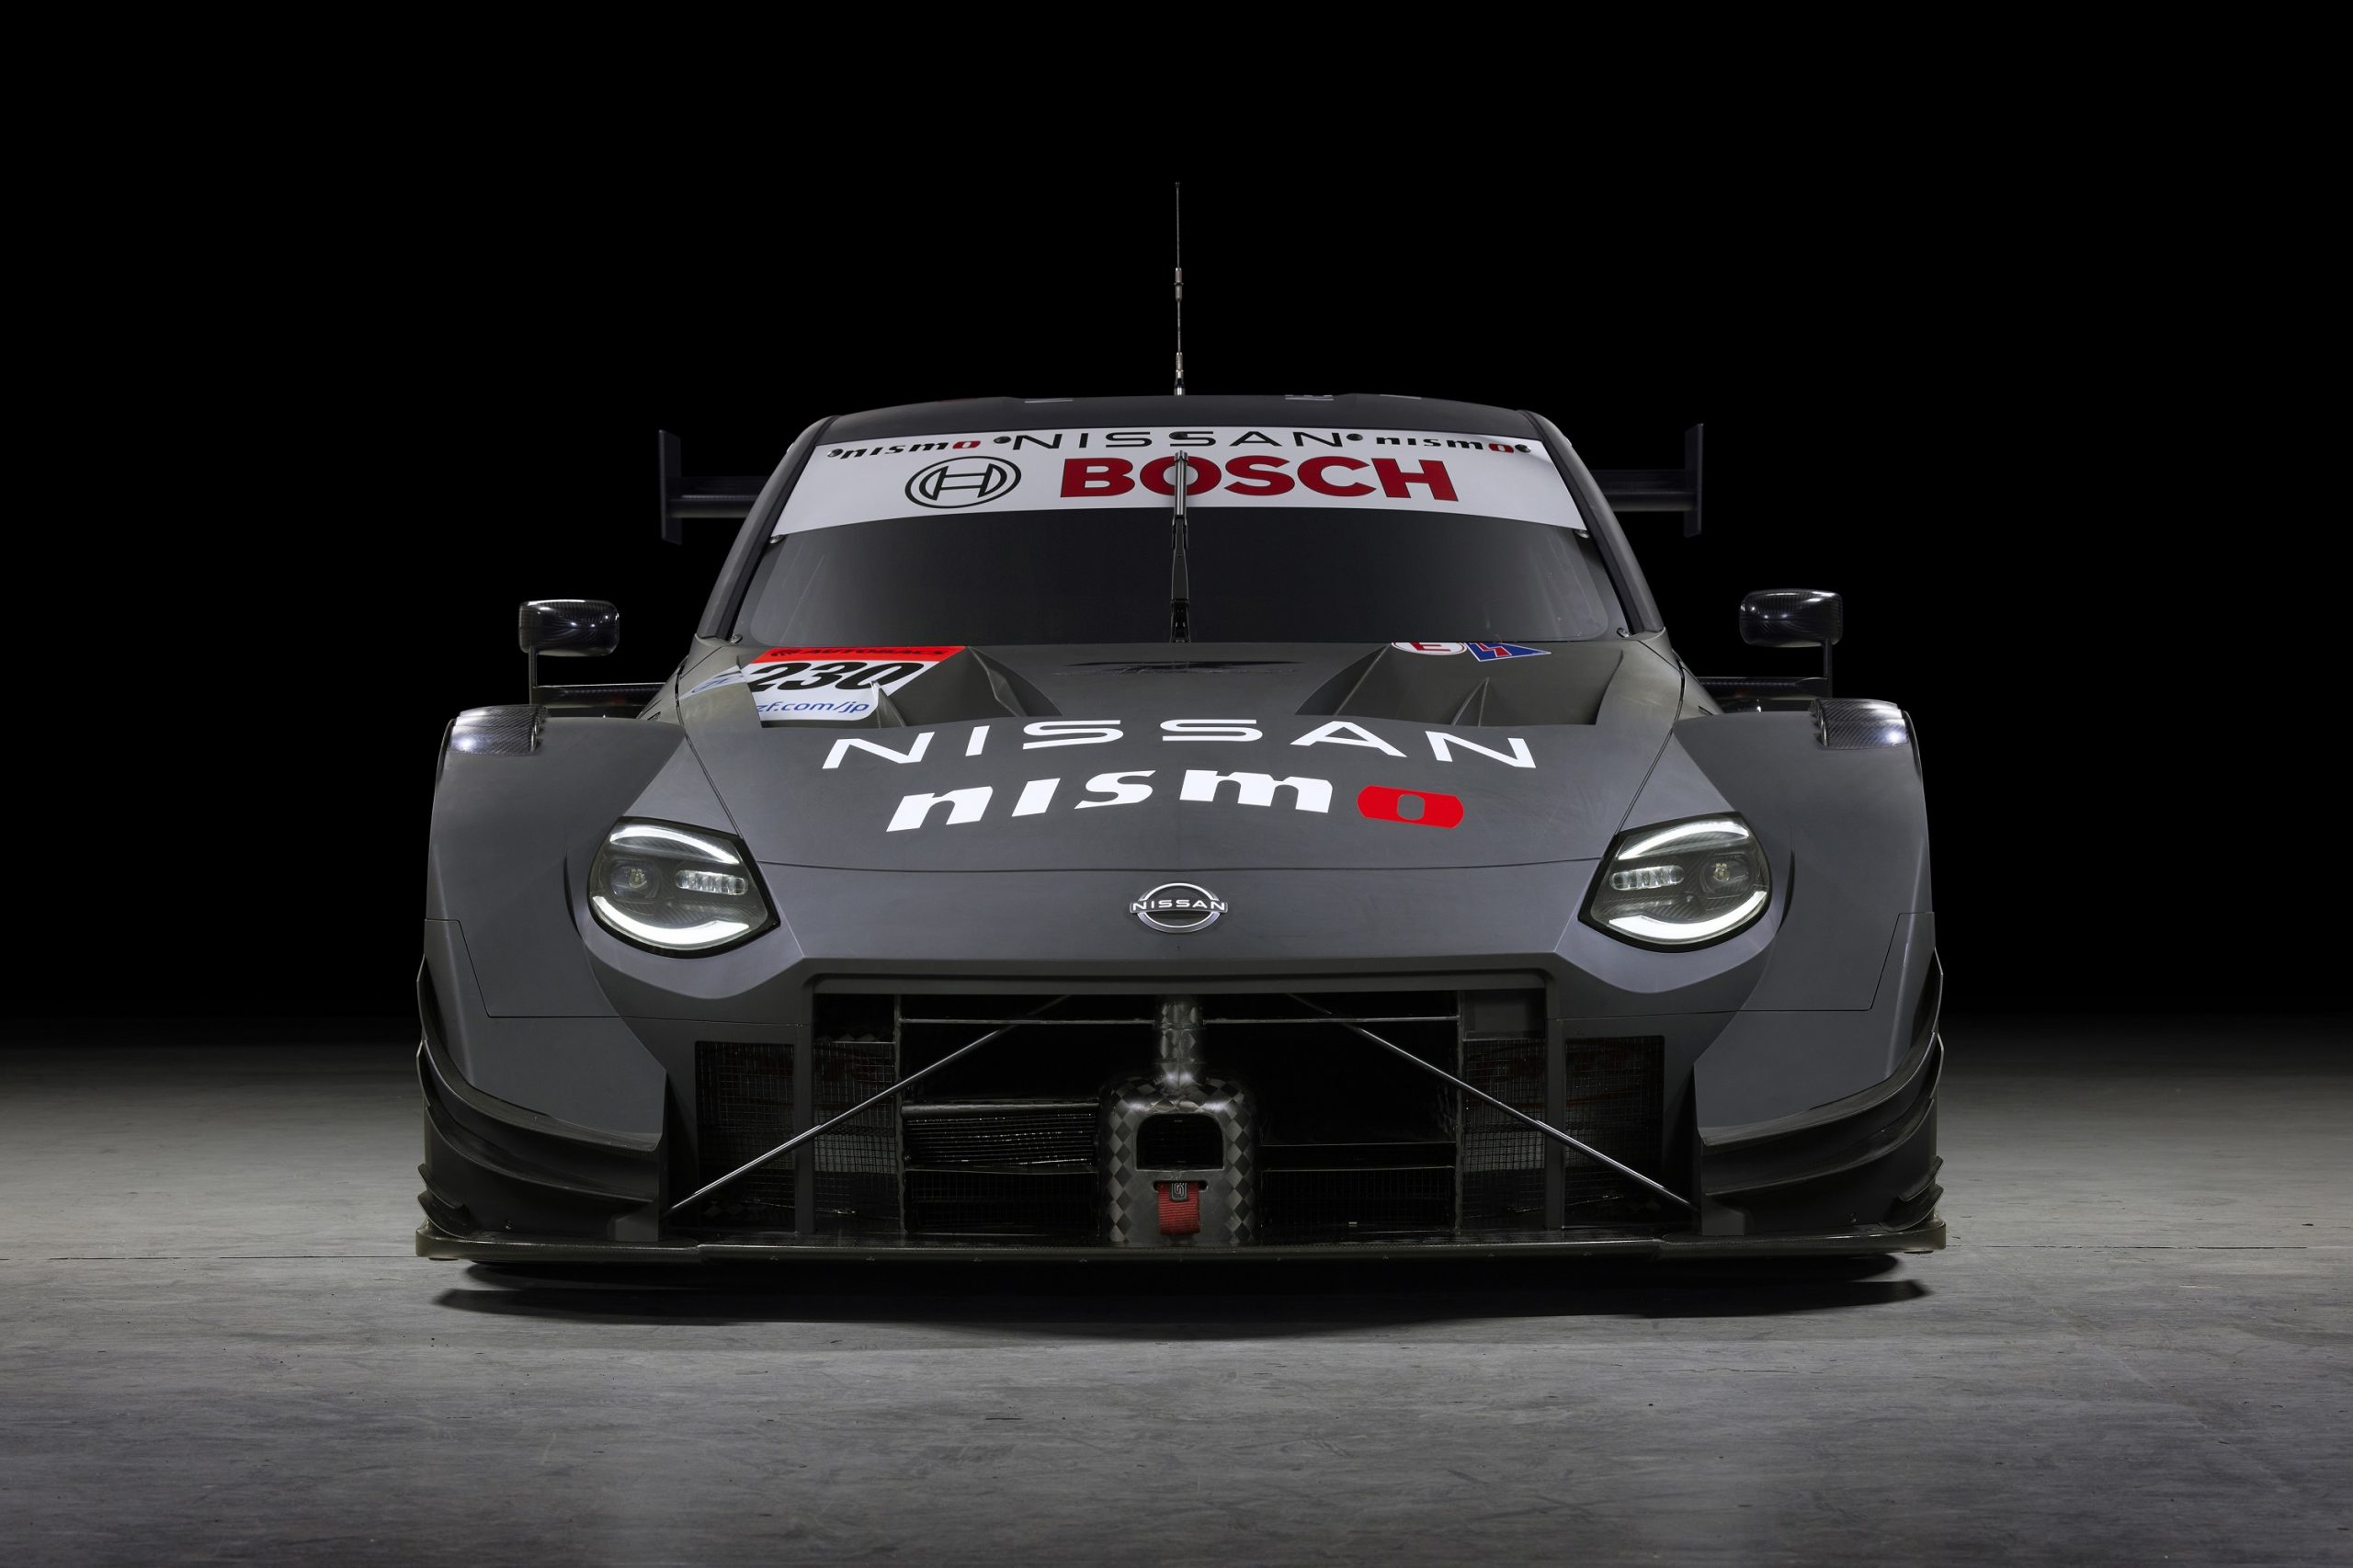 A front shot of the Nissan Z racing car in black